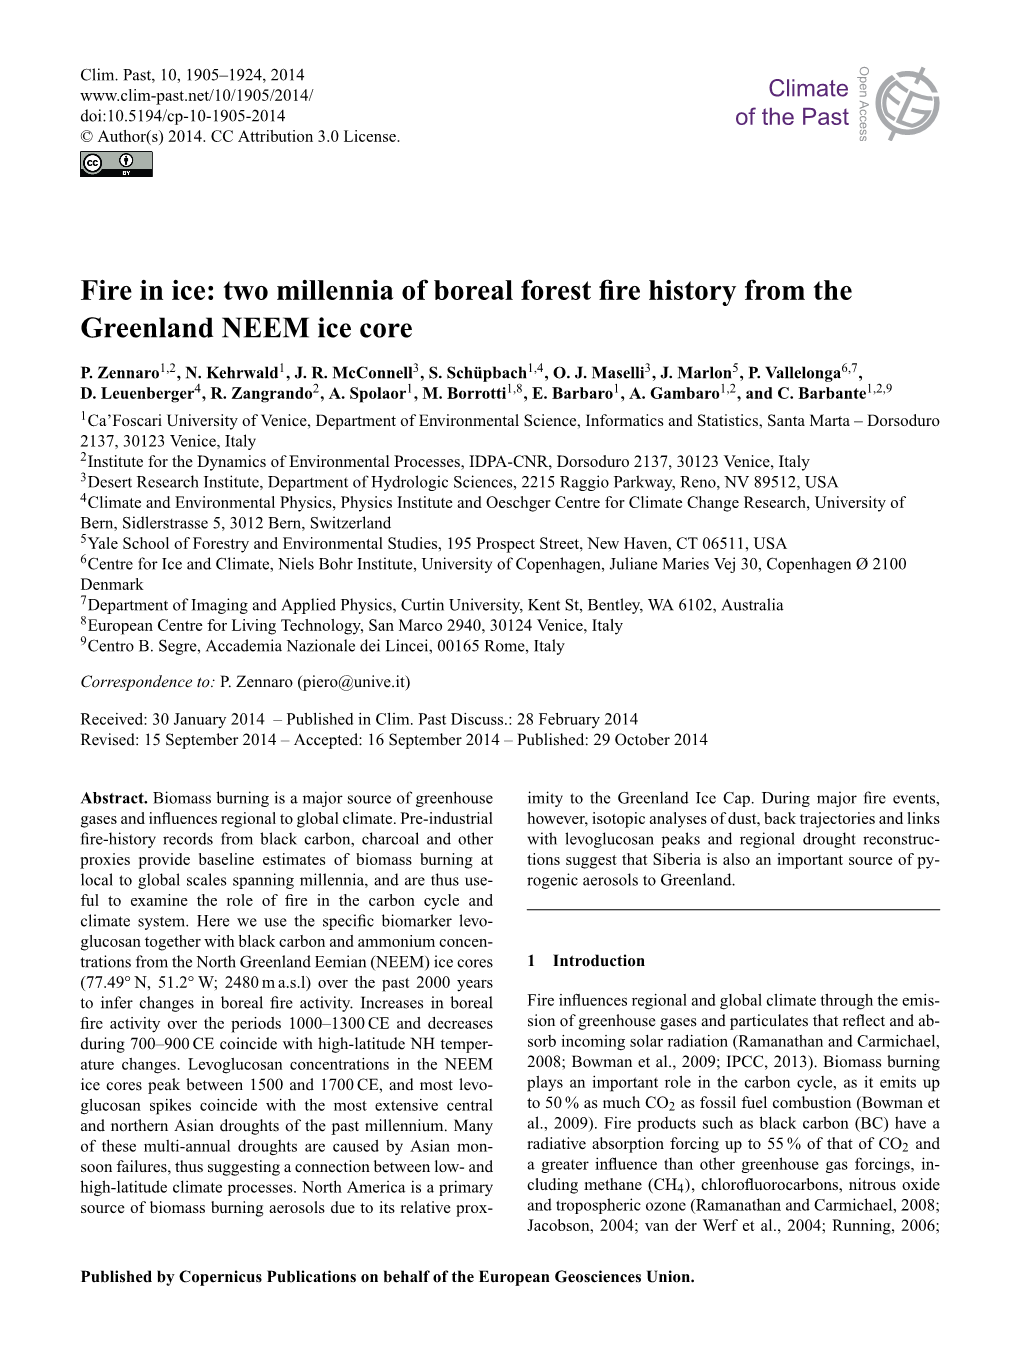 Two Millennia of Boreal Forest Fire History from the Greenland NEEM